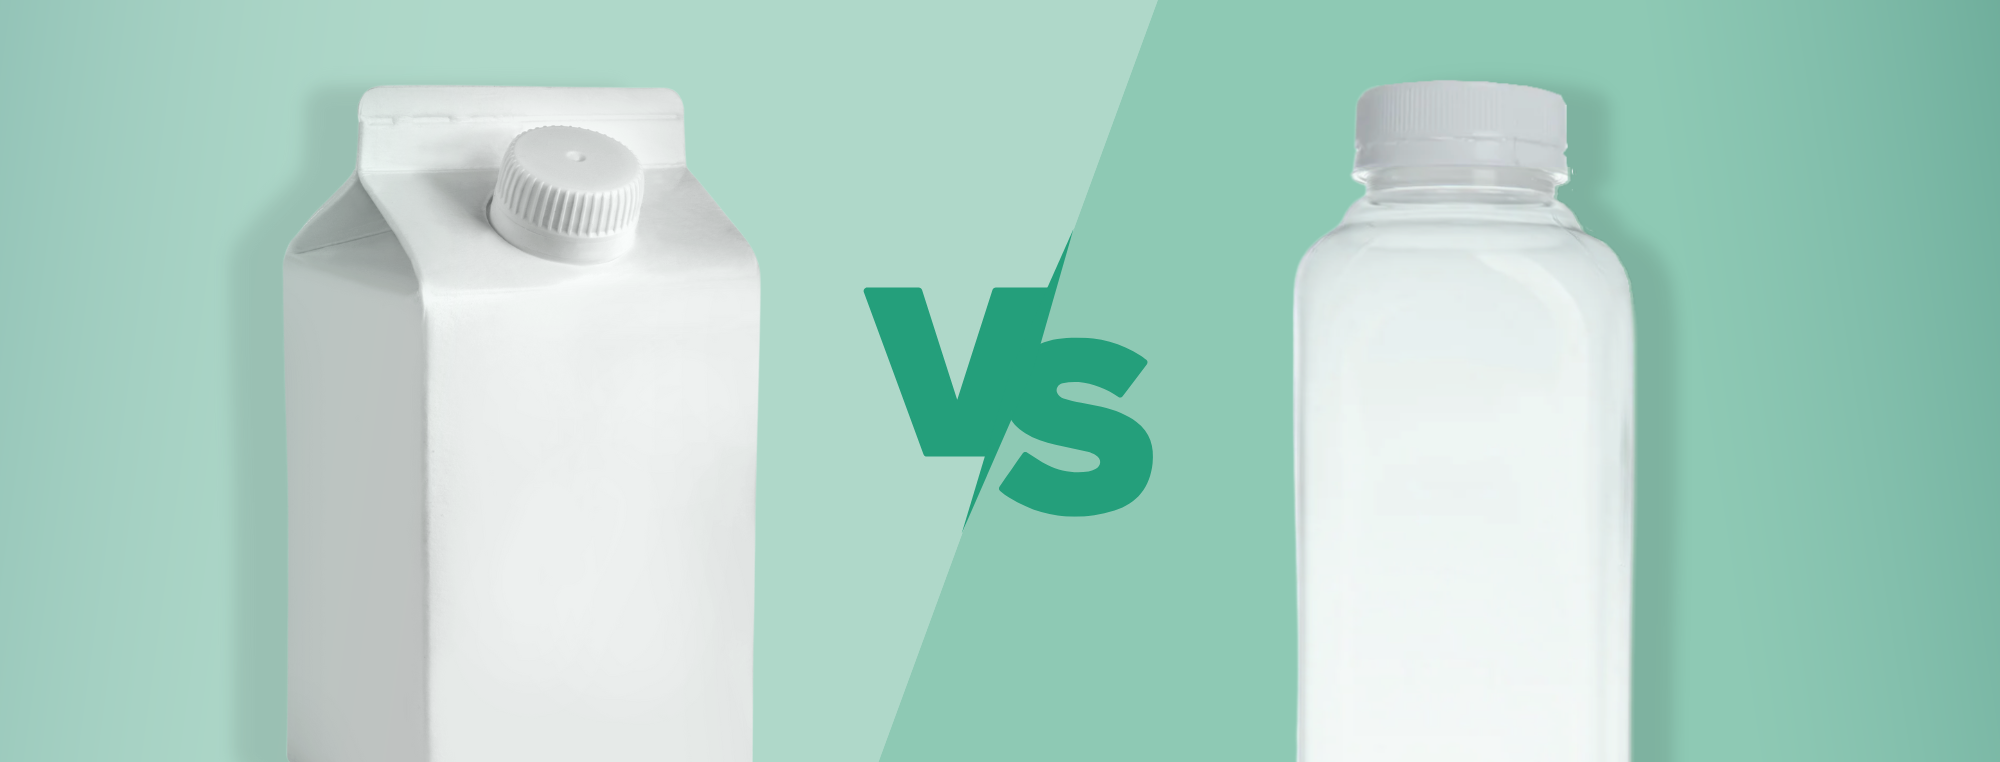 Paper Cartons or Plastic Bottles? Which is Better for the Environment?